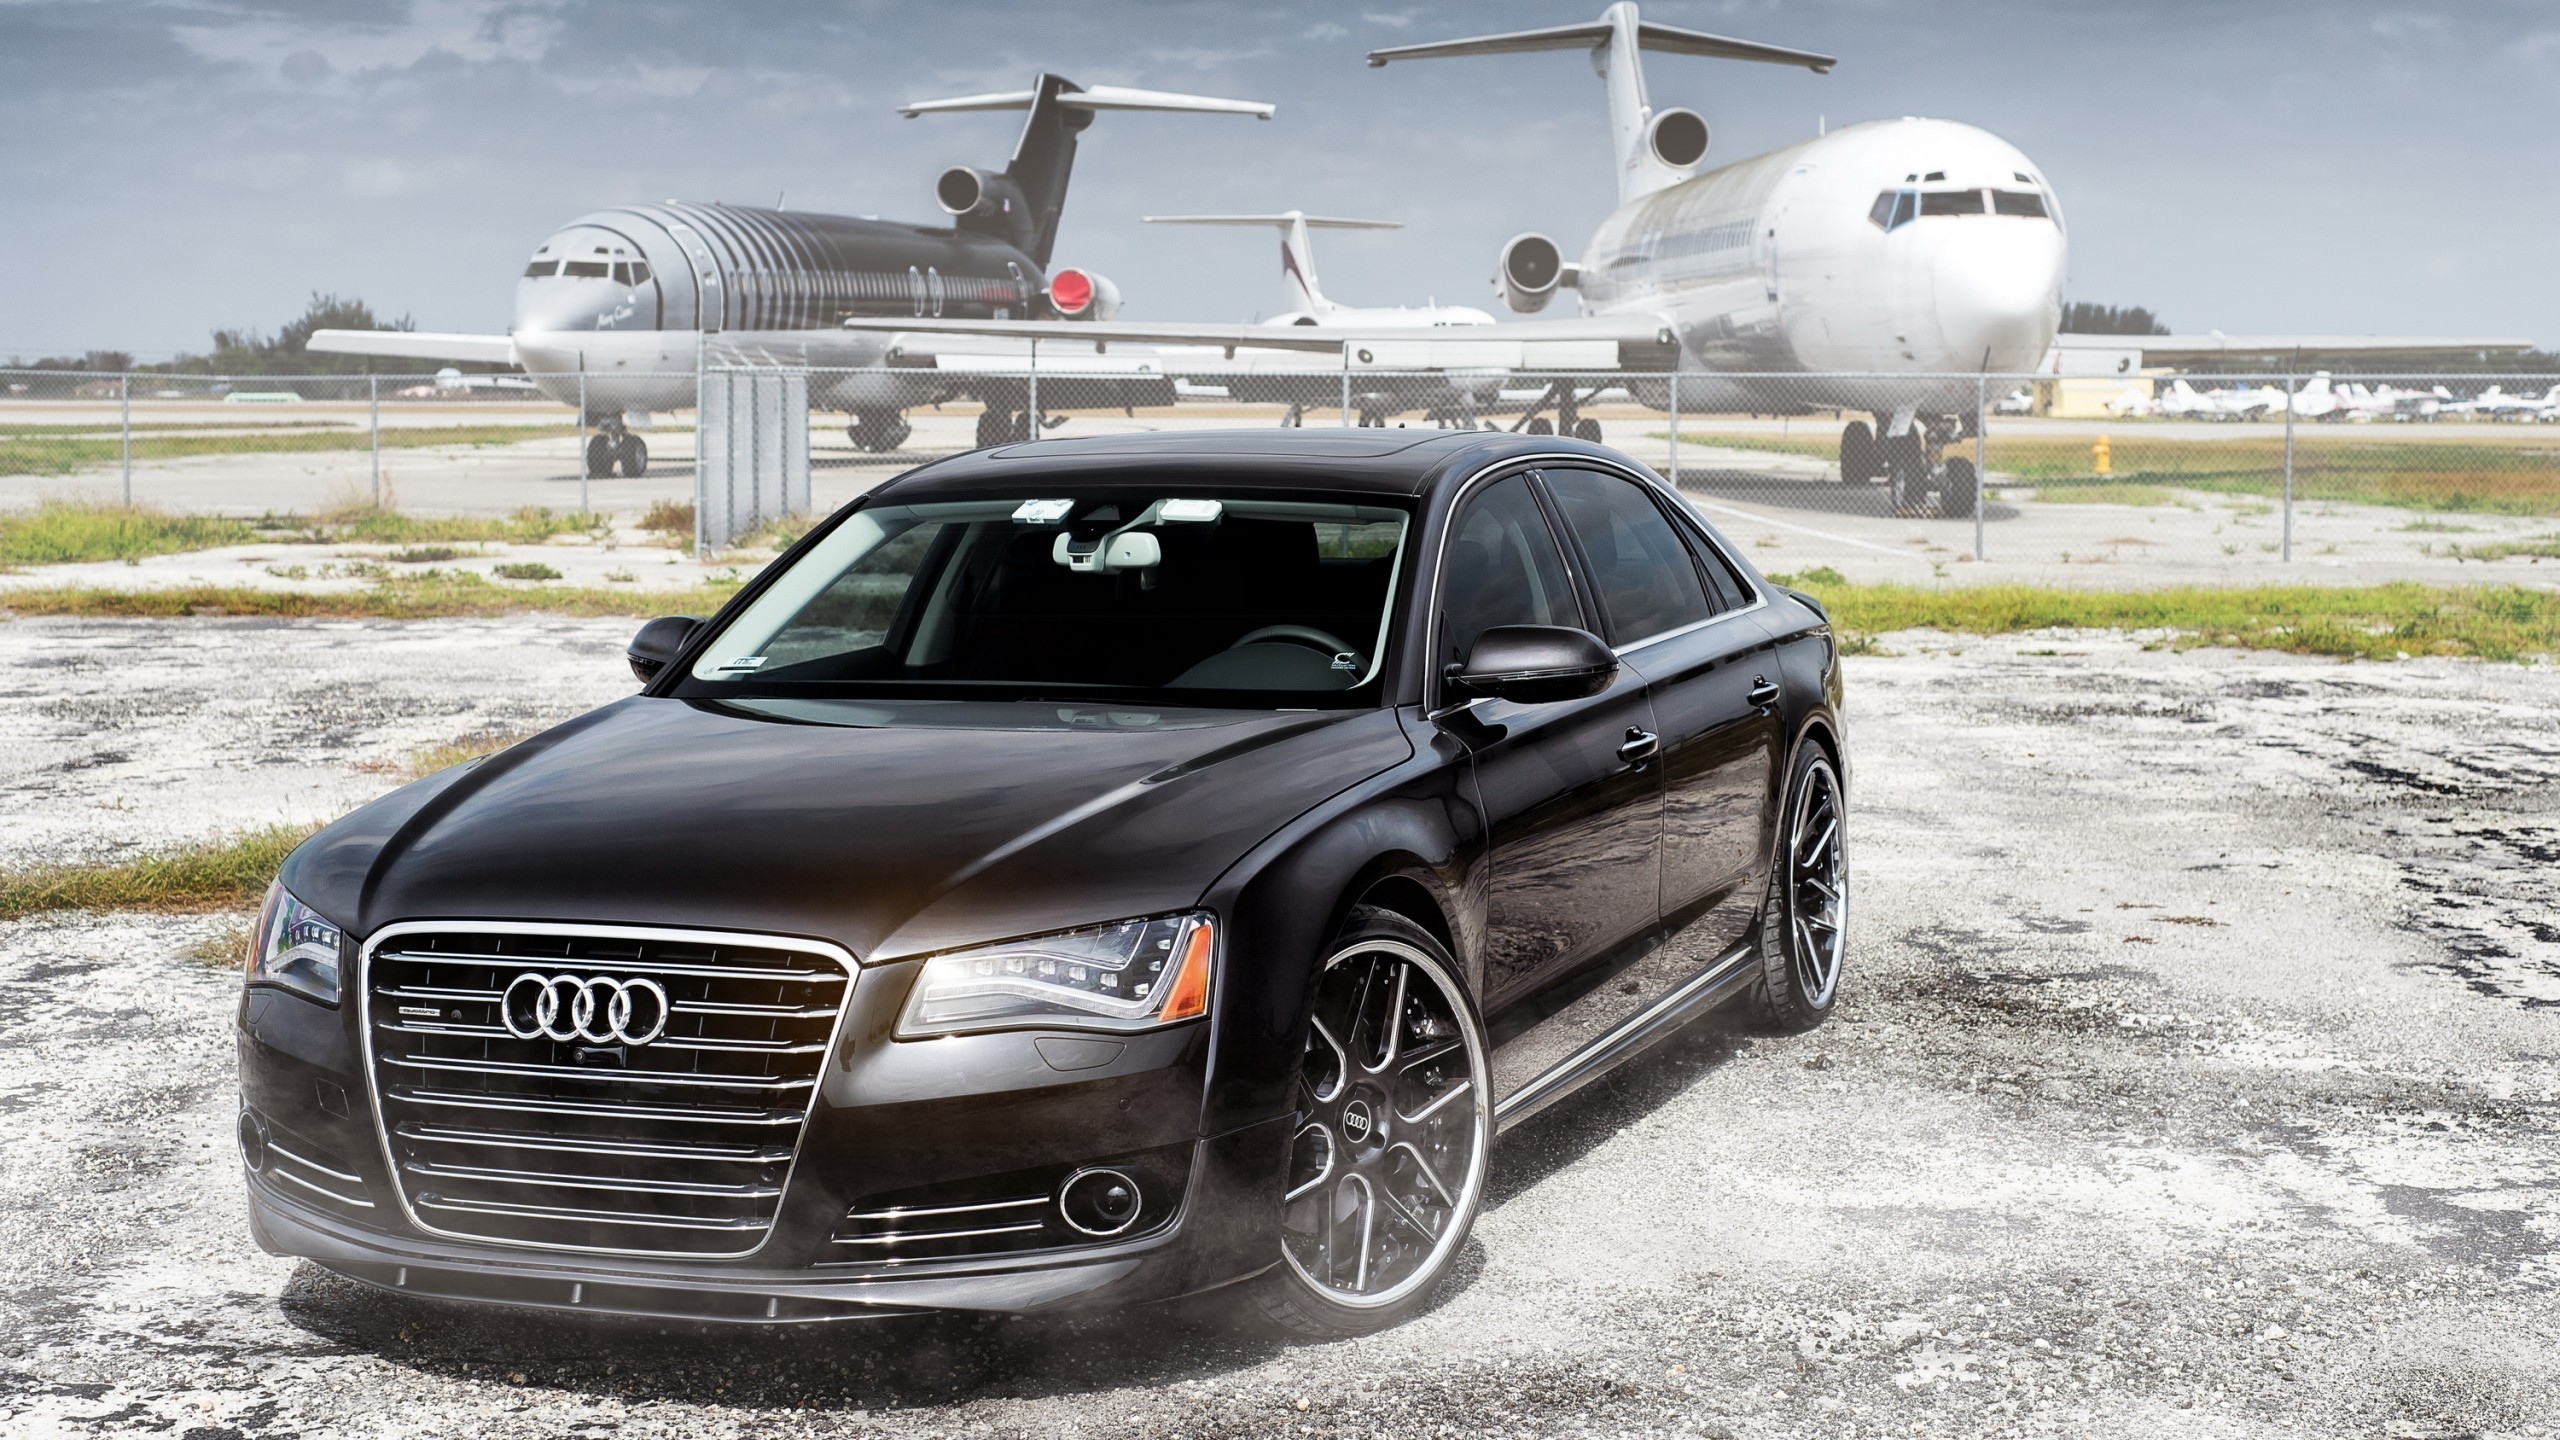 Stunning Audi A8 for 2560x1440 HDTV resolution